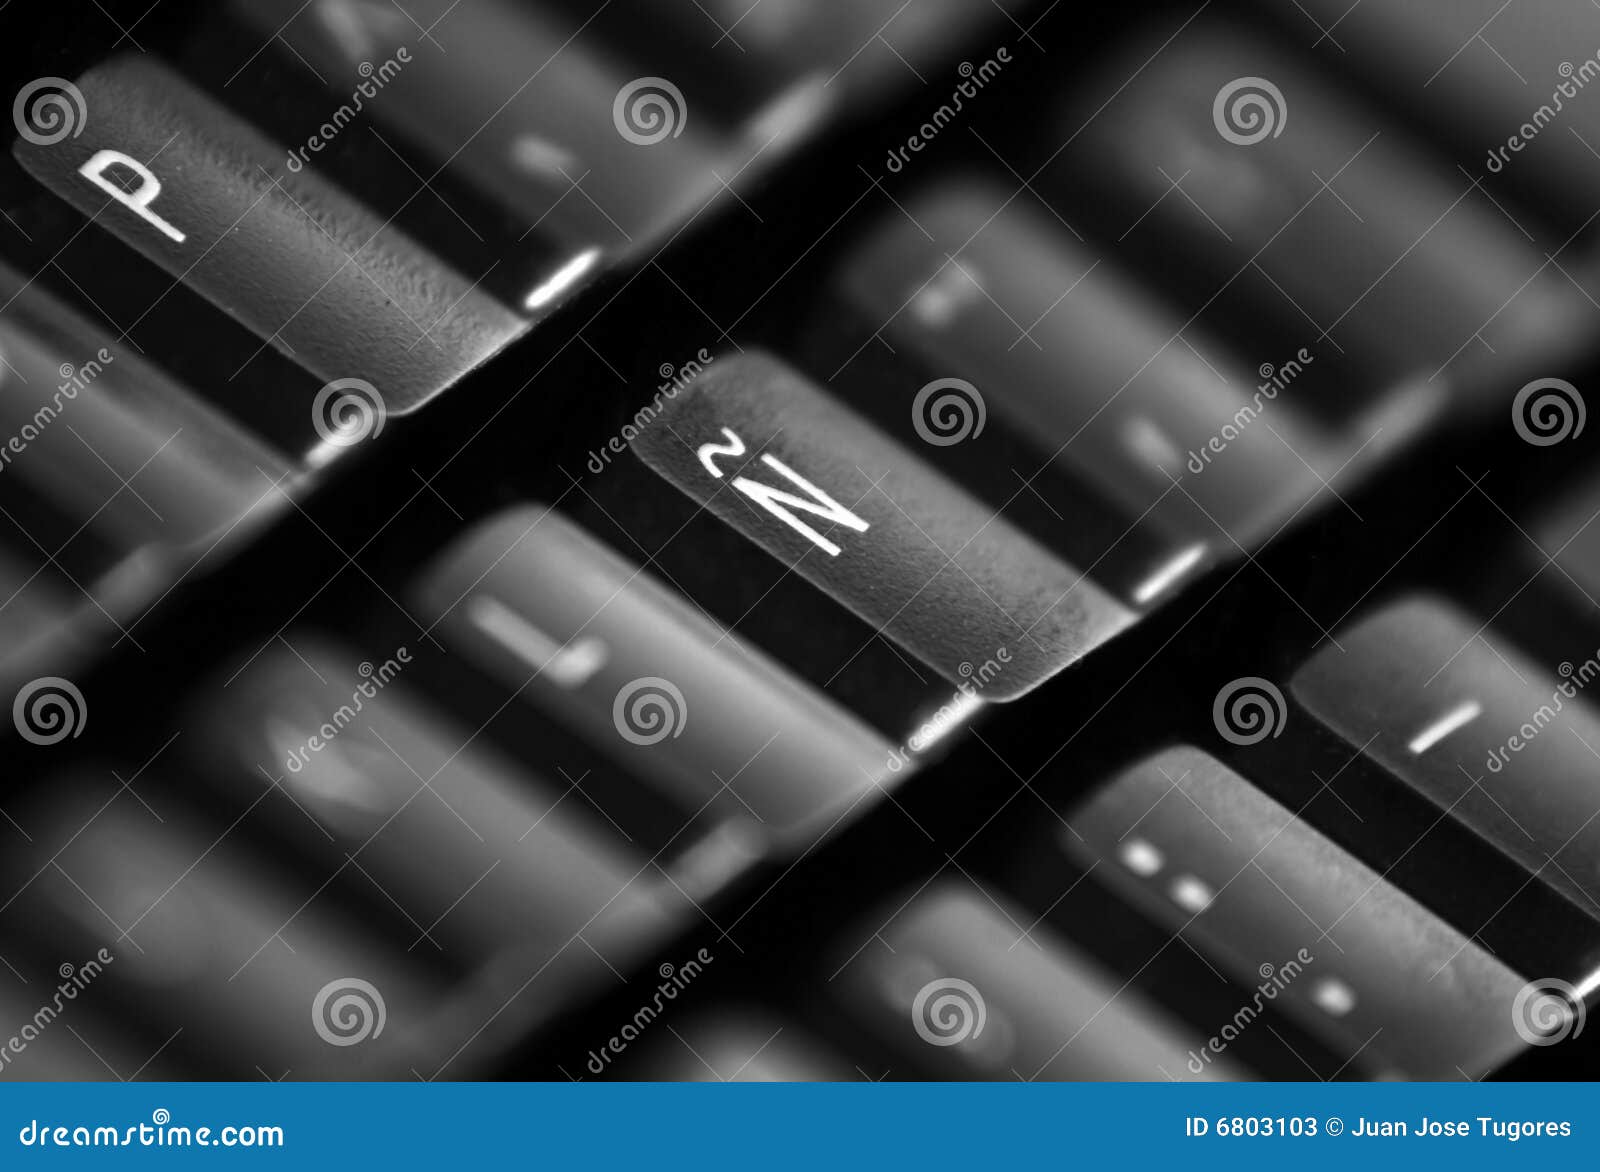 Spanish Letter N On Keyboard Stock Photos   Image 6803103